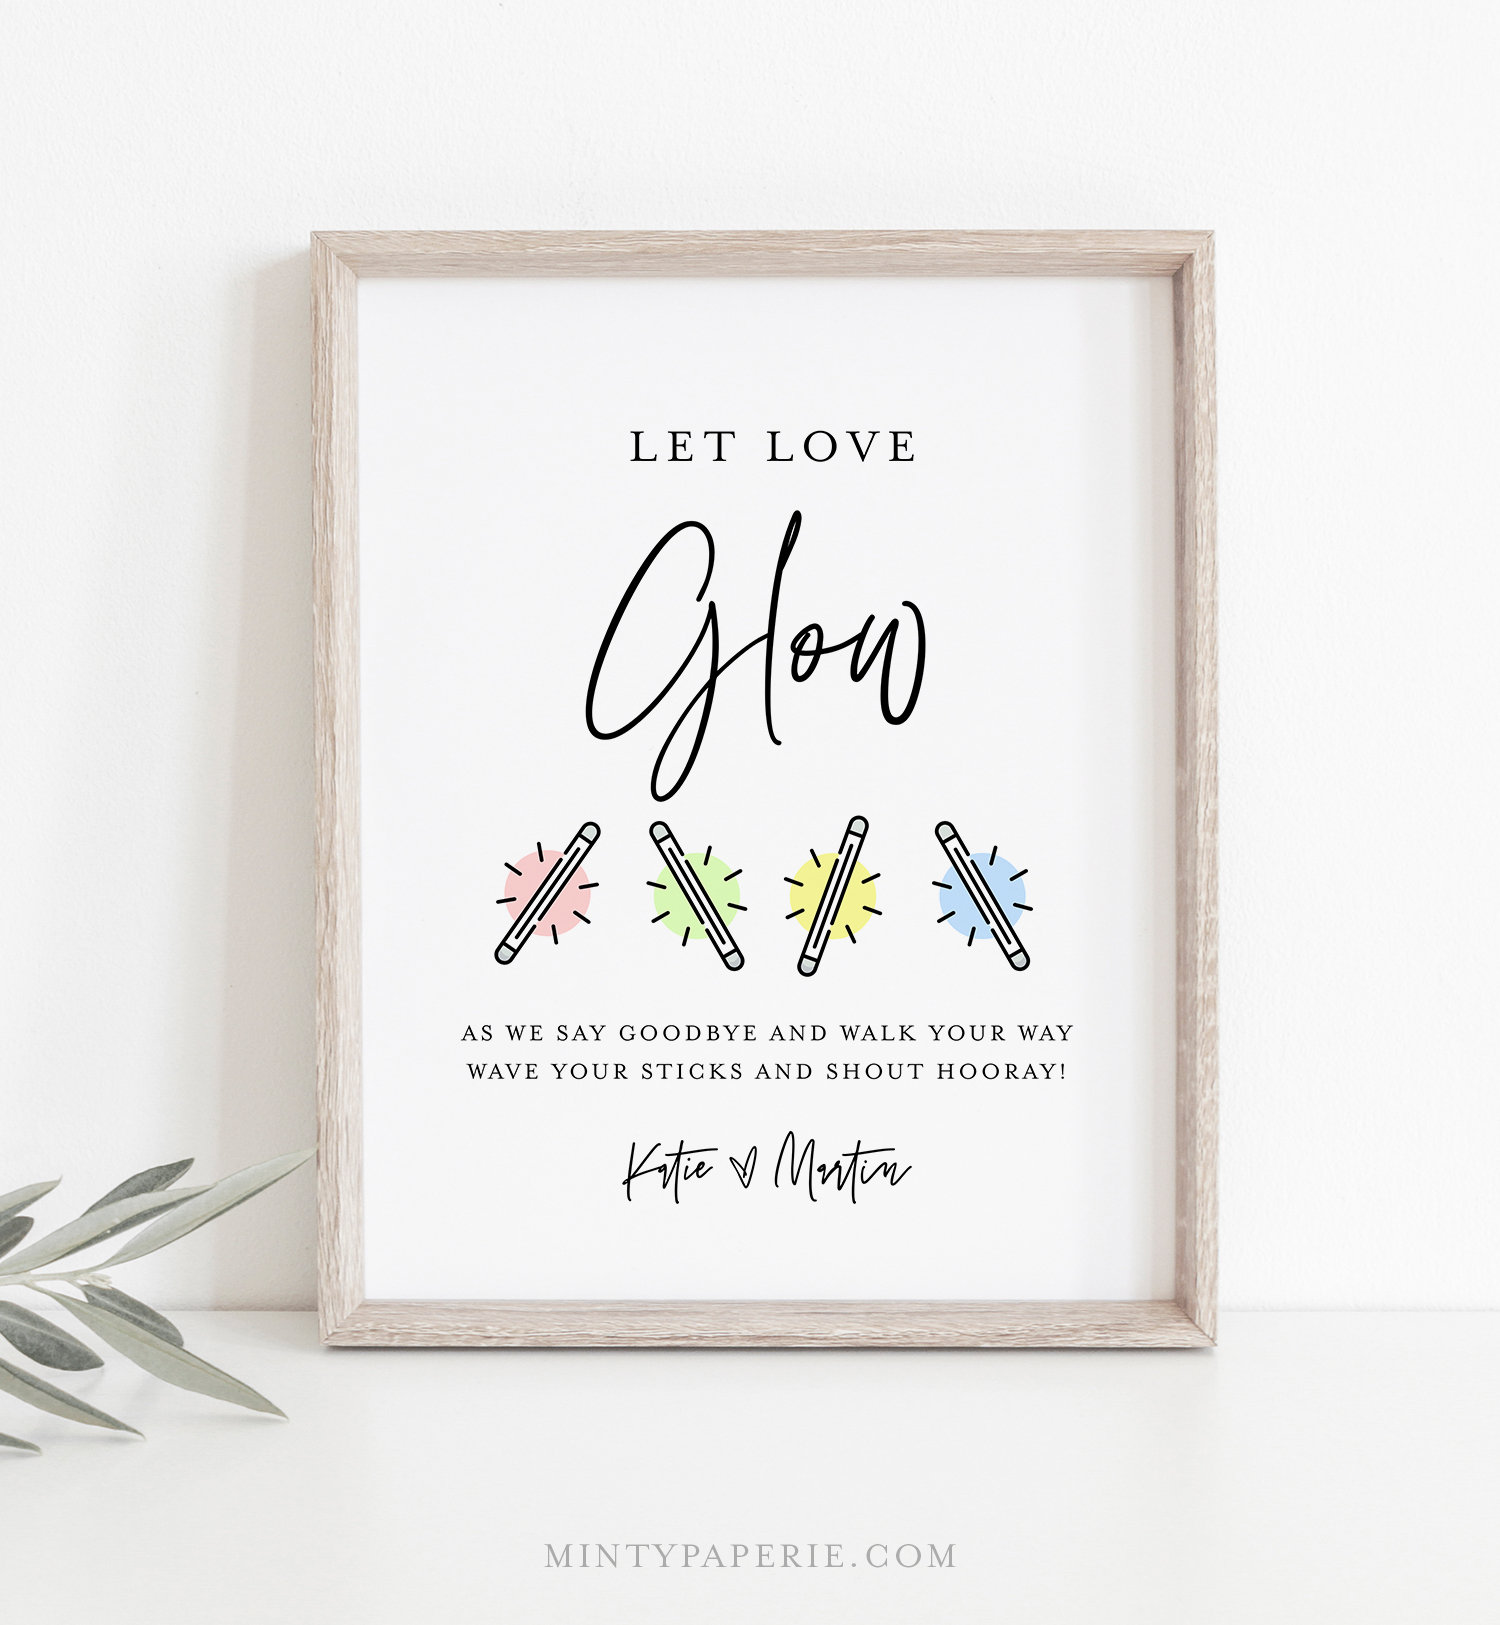 Glow Stick Wedding Send off Sign, Let Love Glow, Minimalist Modern,  Editable Template, Printable, Instant Download, Templett, 8x10 0009-71S 